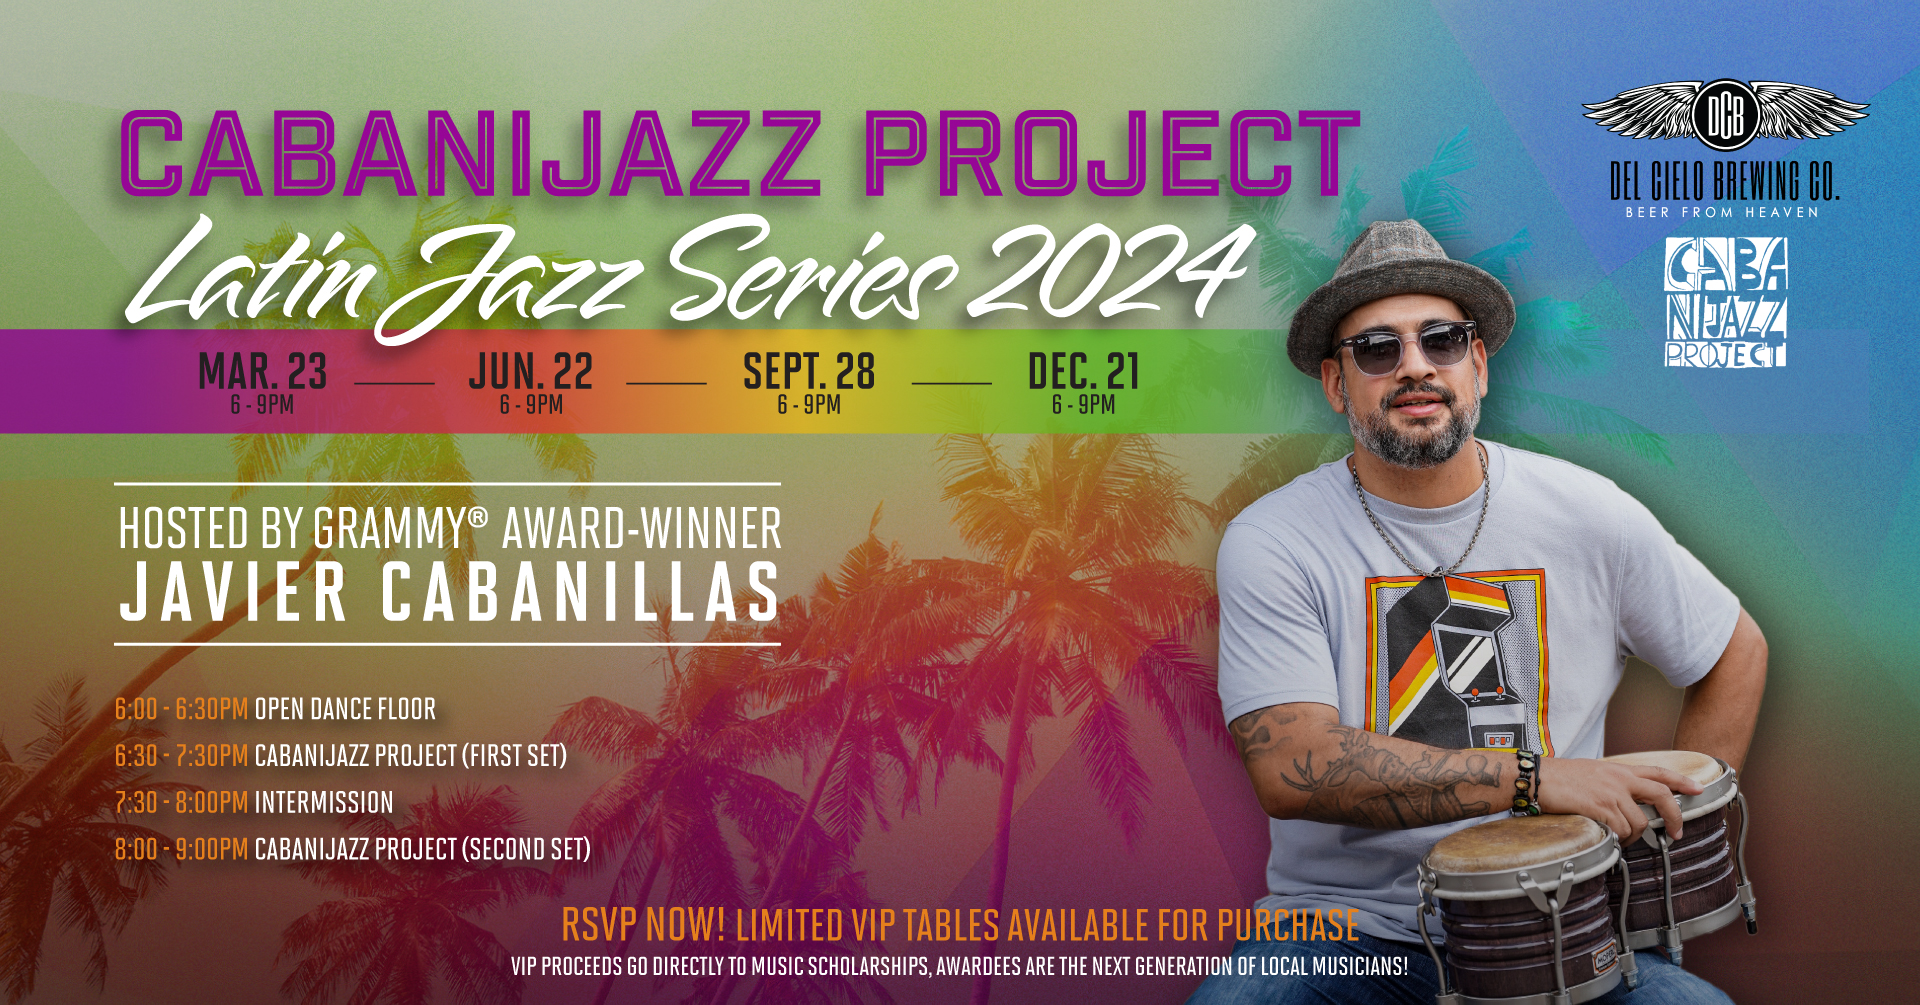 Cabanijazz Project Jazz Series Poster with schedule of events.